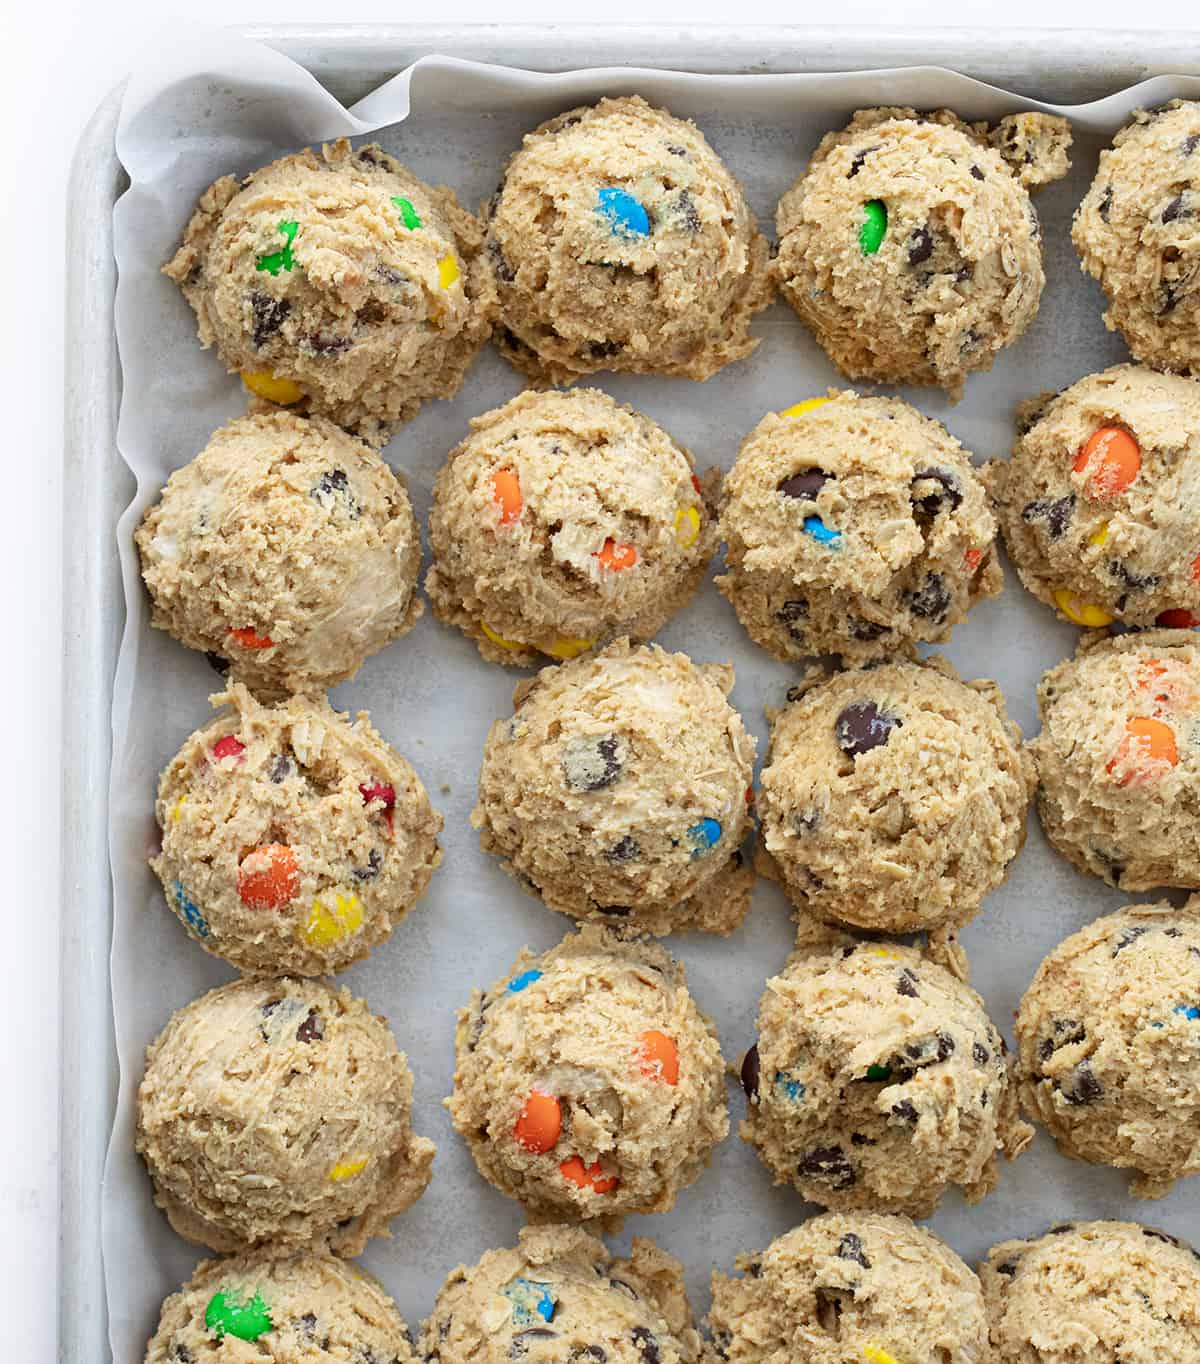 Raw Cookie Balls on a Sheet Pan Before Freezing